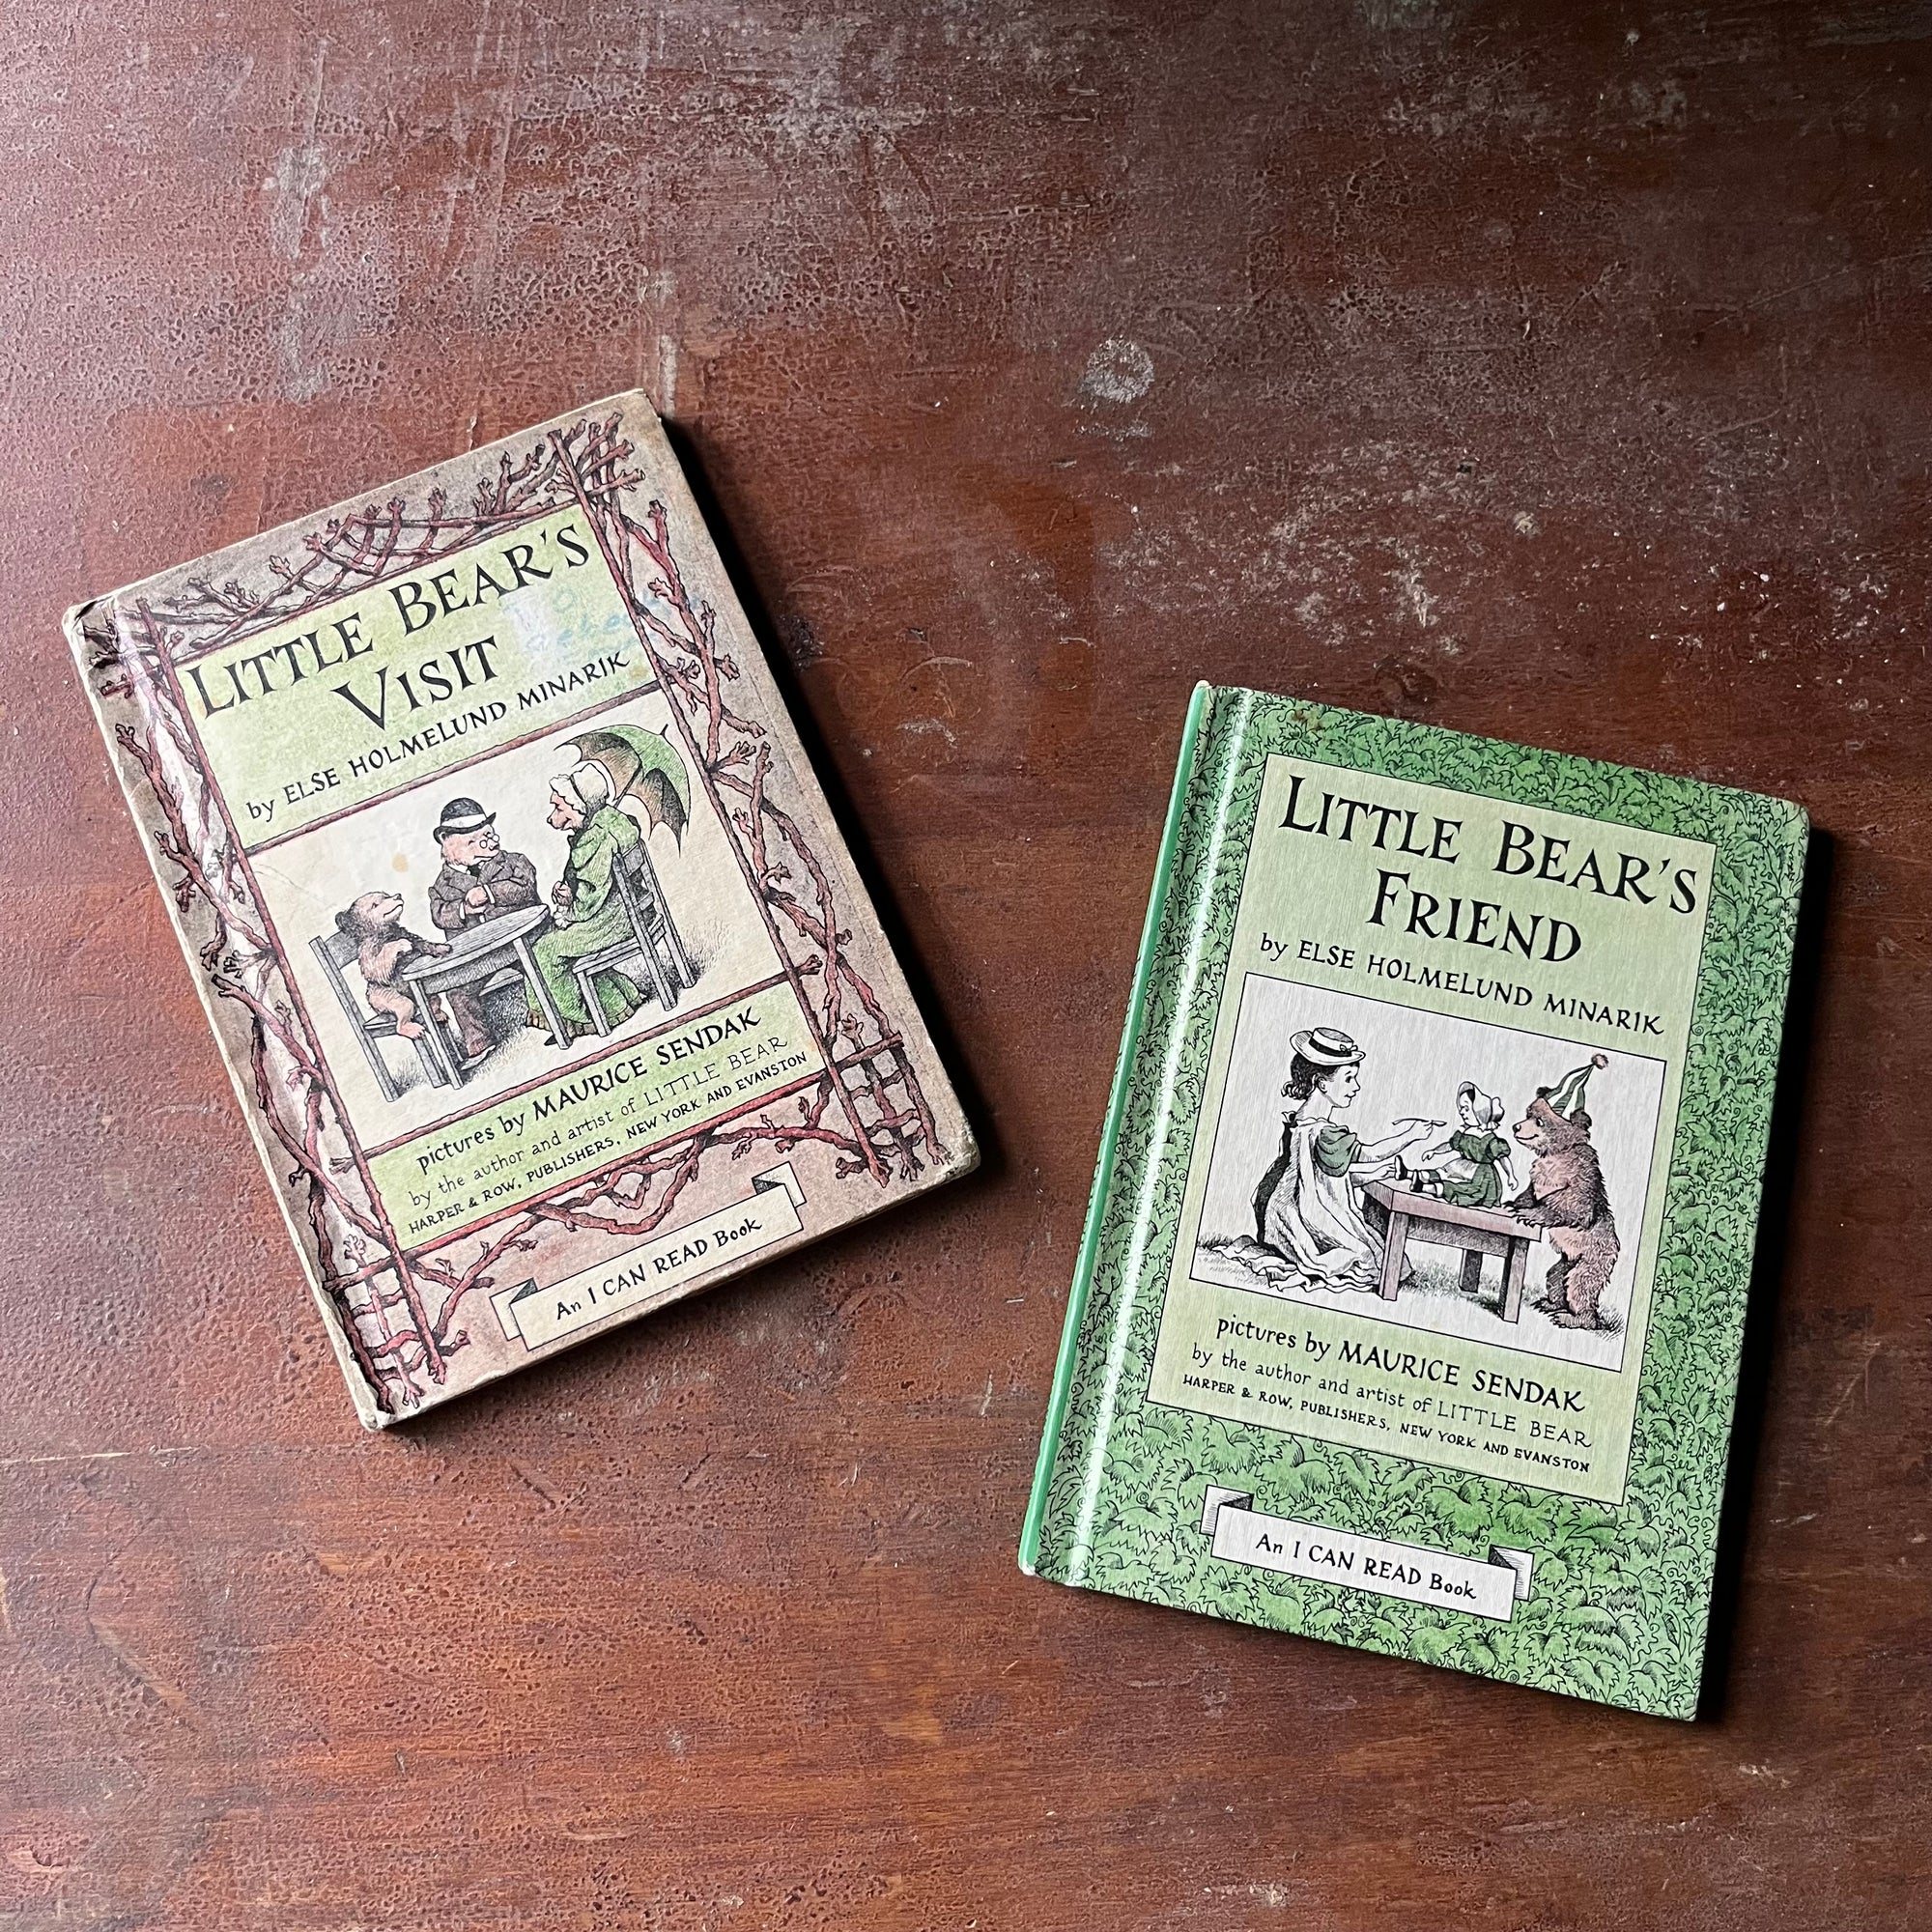 vintage children's picture books, An I Can Read Book - Pair of Little Bear Books written by Else Holmelund Minarik with illustrations by Maurice Sendak - Little Bear's Visit and Little Bear's Friend - view of the front covers